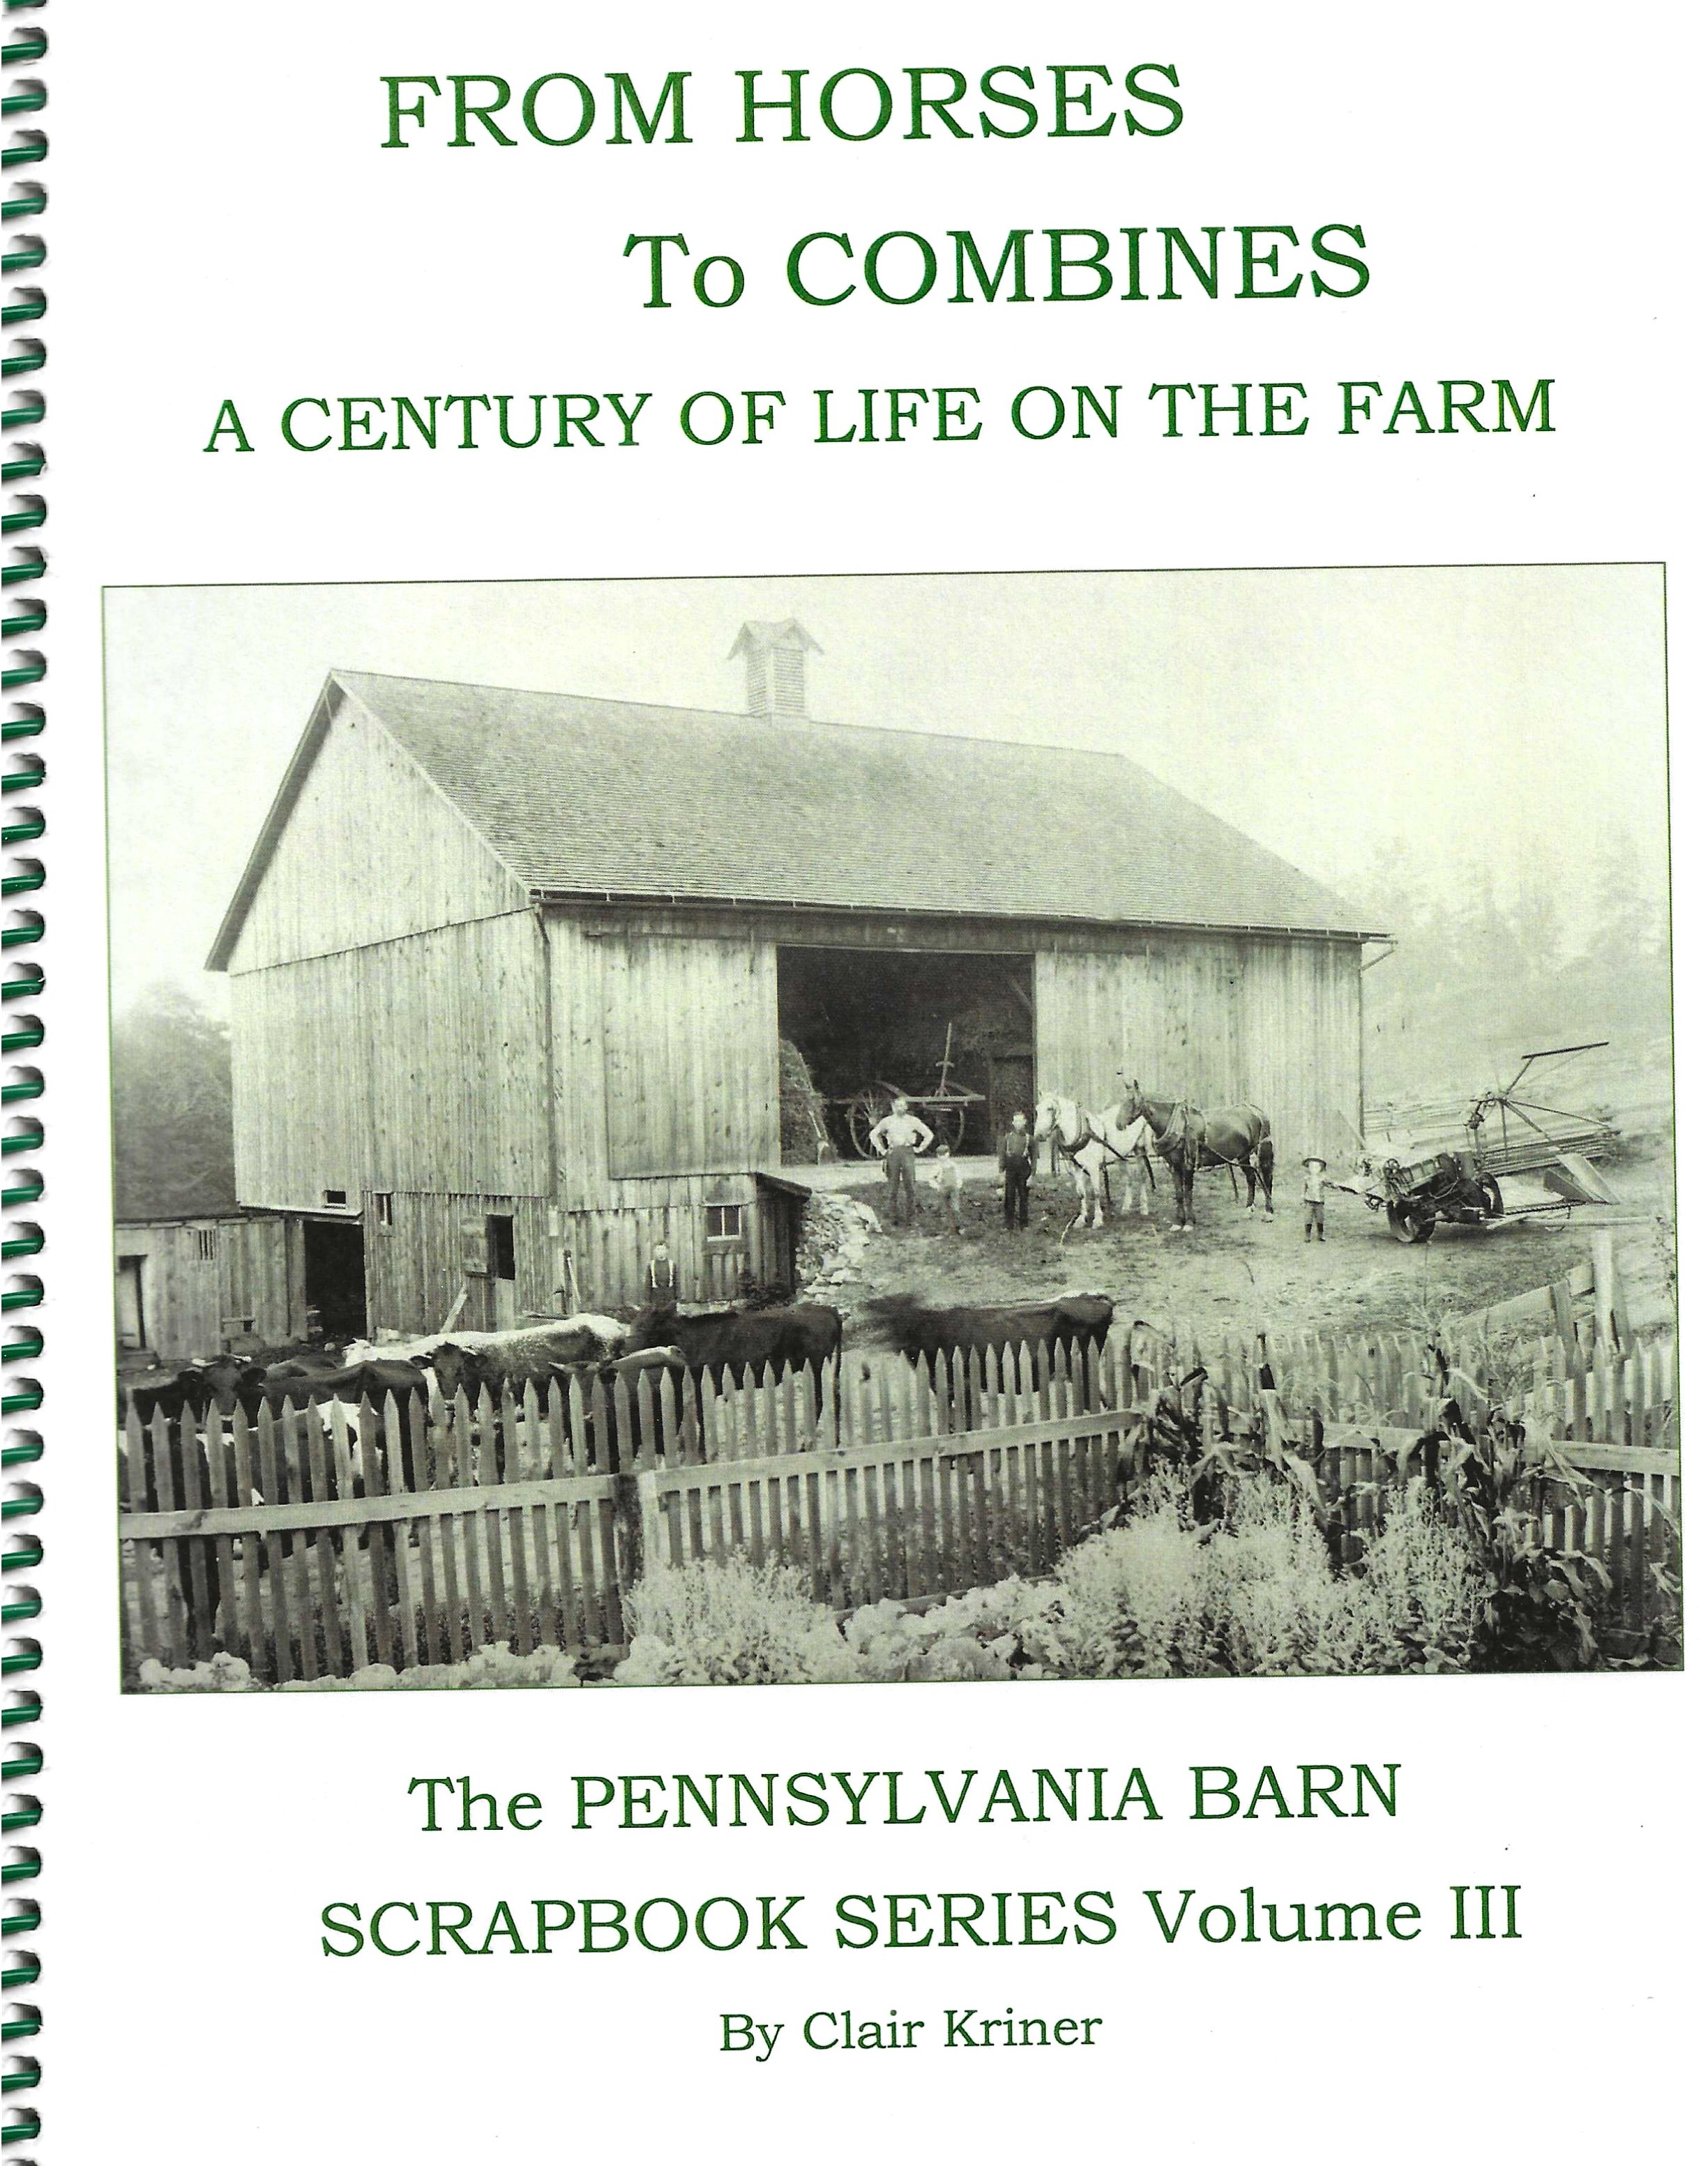 From Horses to Combines - A Century of Life on the Farm